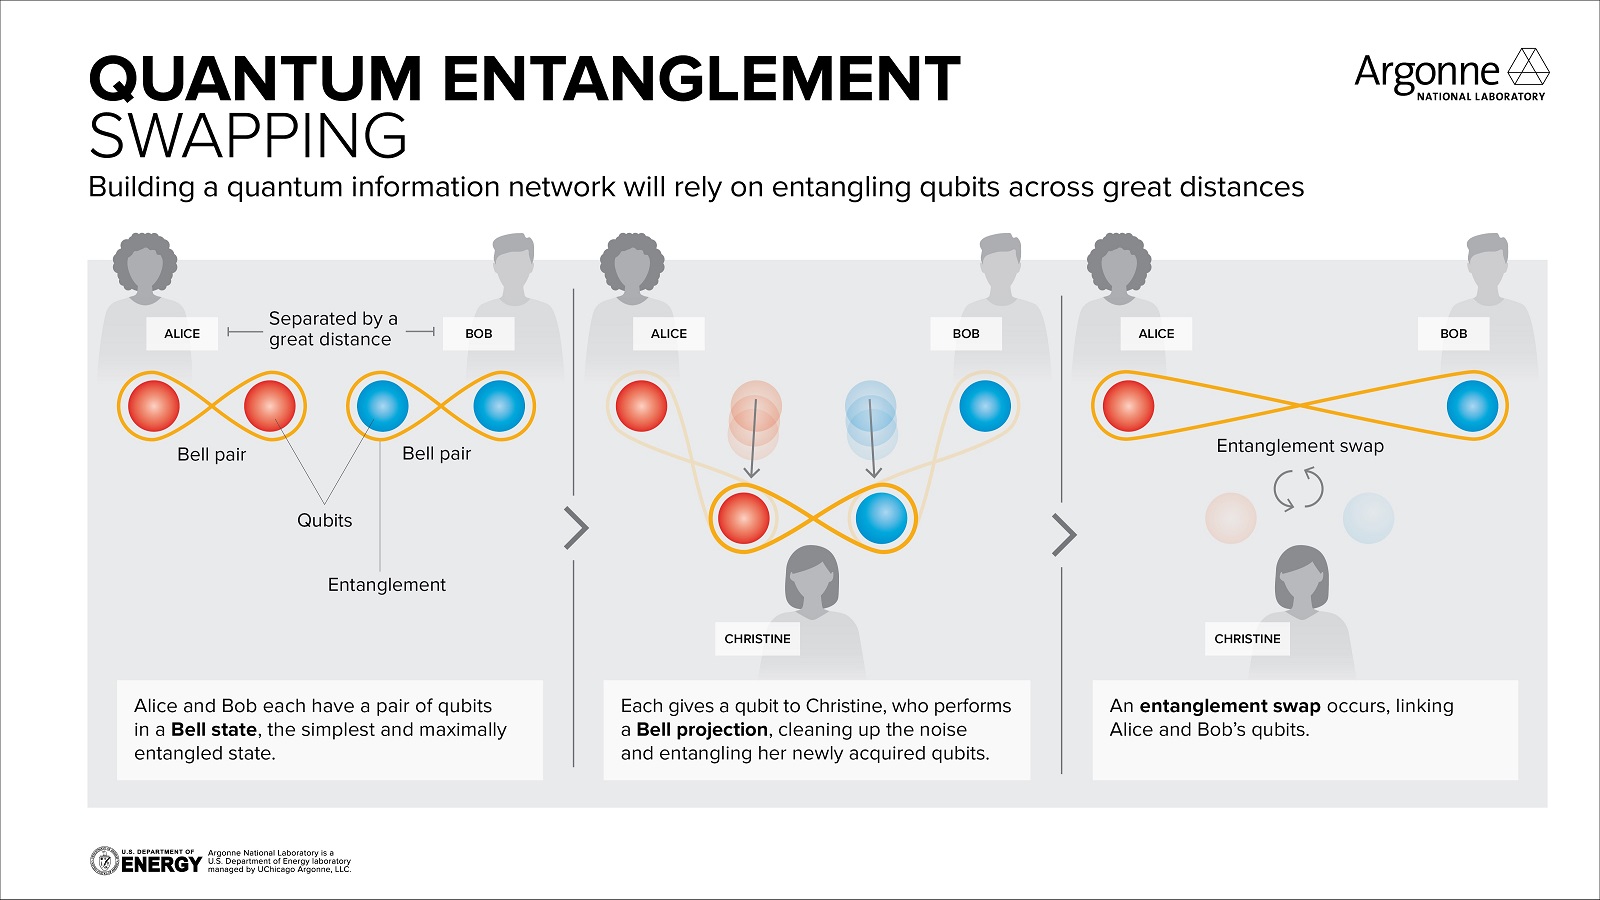 Graphic of Quantum entanglement swapping; building a quantum network will rely on entangling qubits across great distances. (Image by Argonne National Laboratory.)